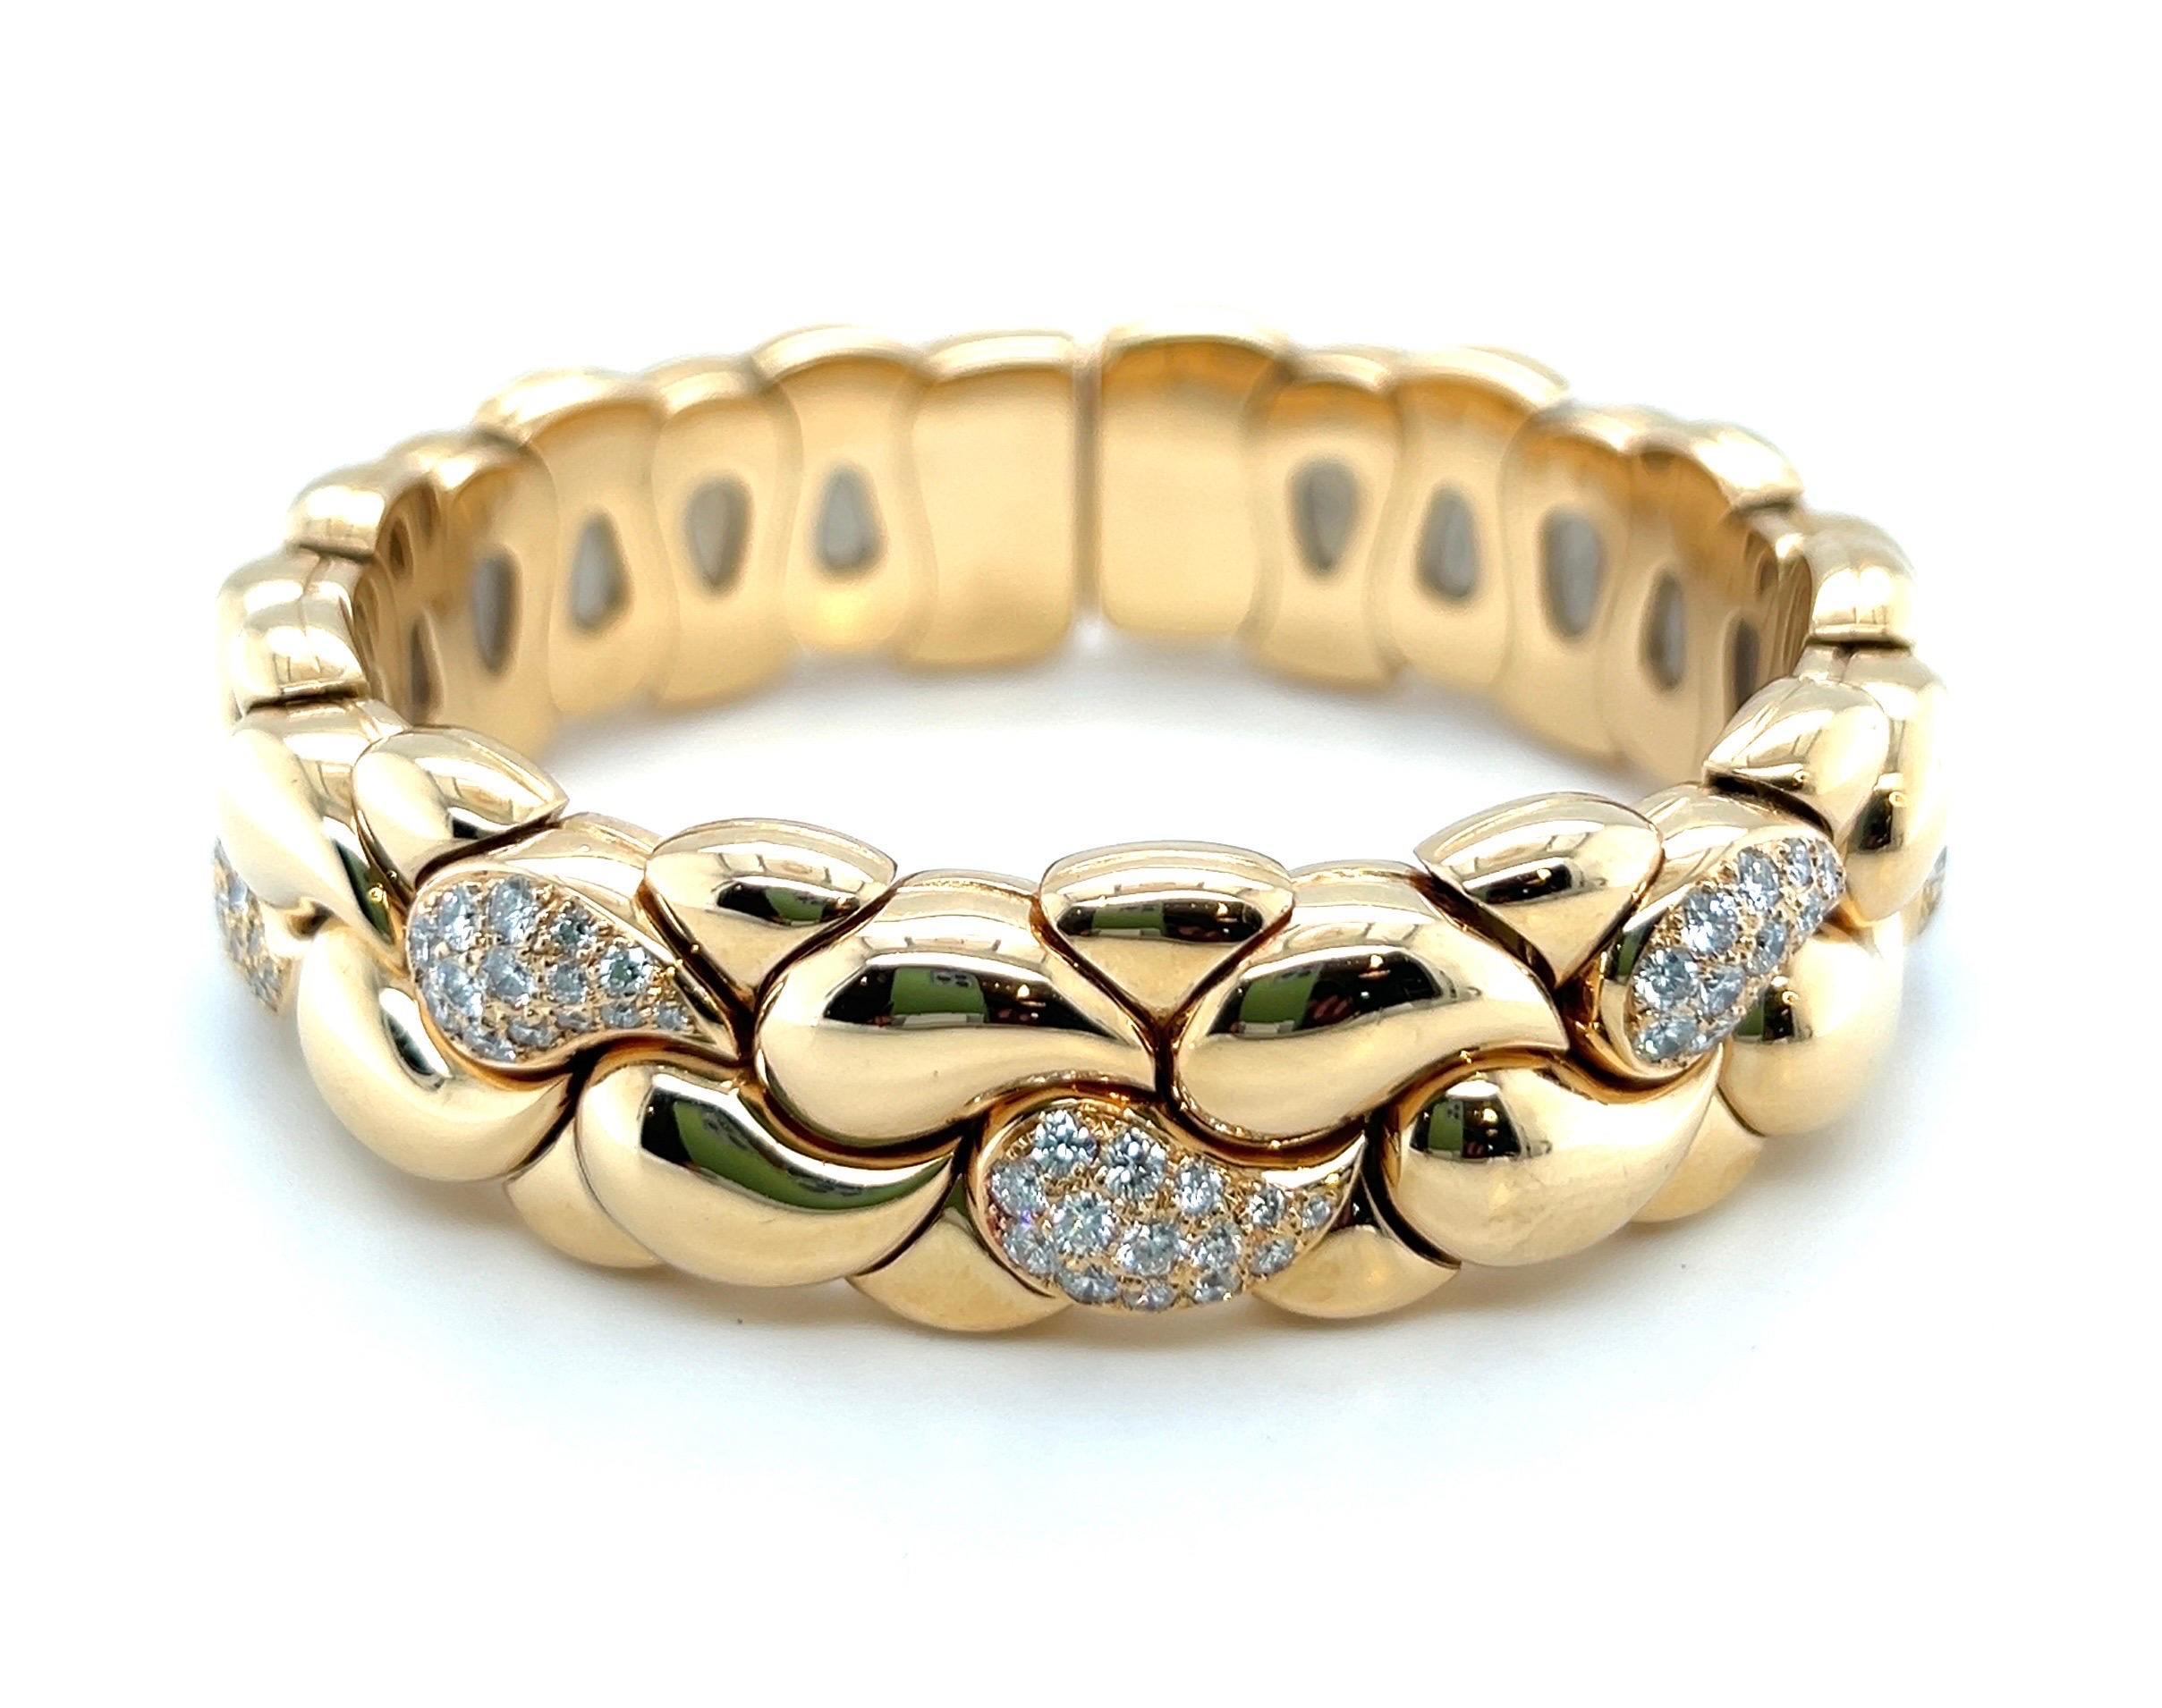 Striking 18 karat yellow gold and diamond Casmir bangle by renowned Swiss tradition jeweler Chopard.

Flexible bangle, designed as a series of slightly bombé, gold paisley links, seven of which are pavé-set with brilliant-cut diamonds totalling